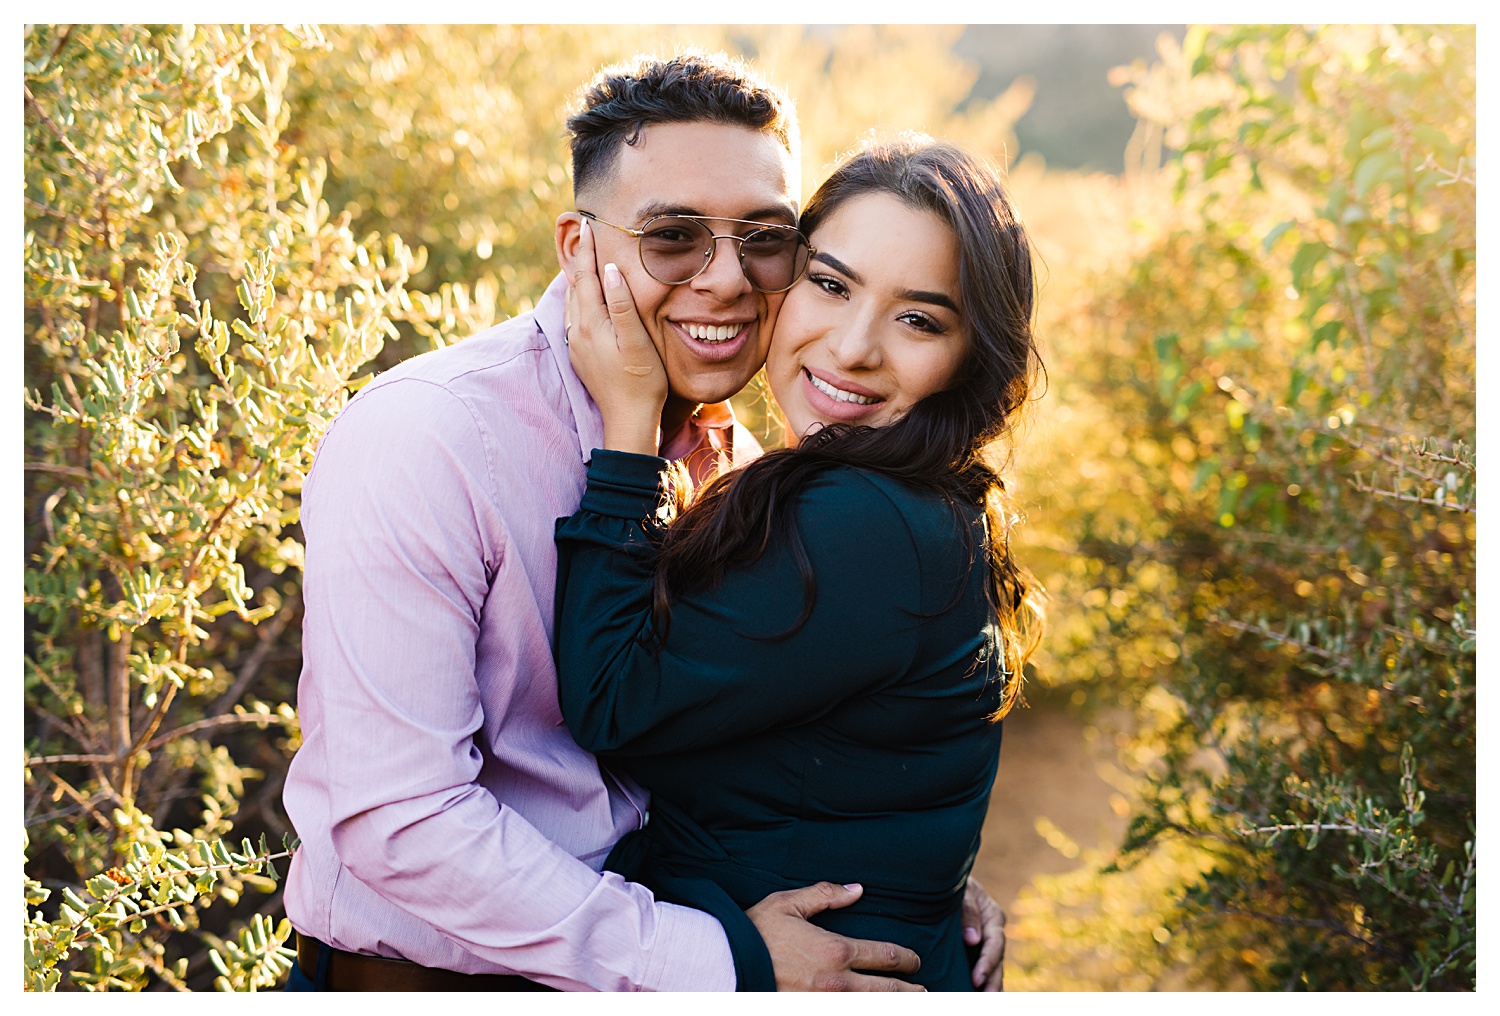 Angeles National Forest Engagement Photos faces snuggled up in forest during golden hour